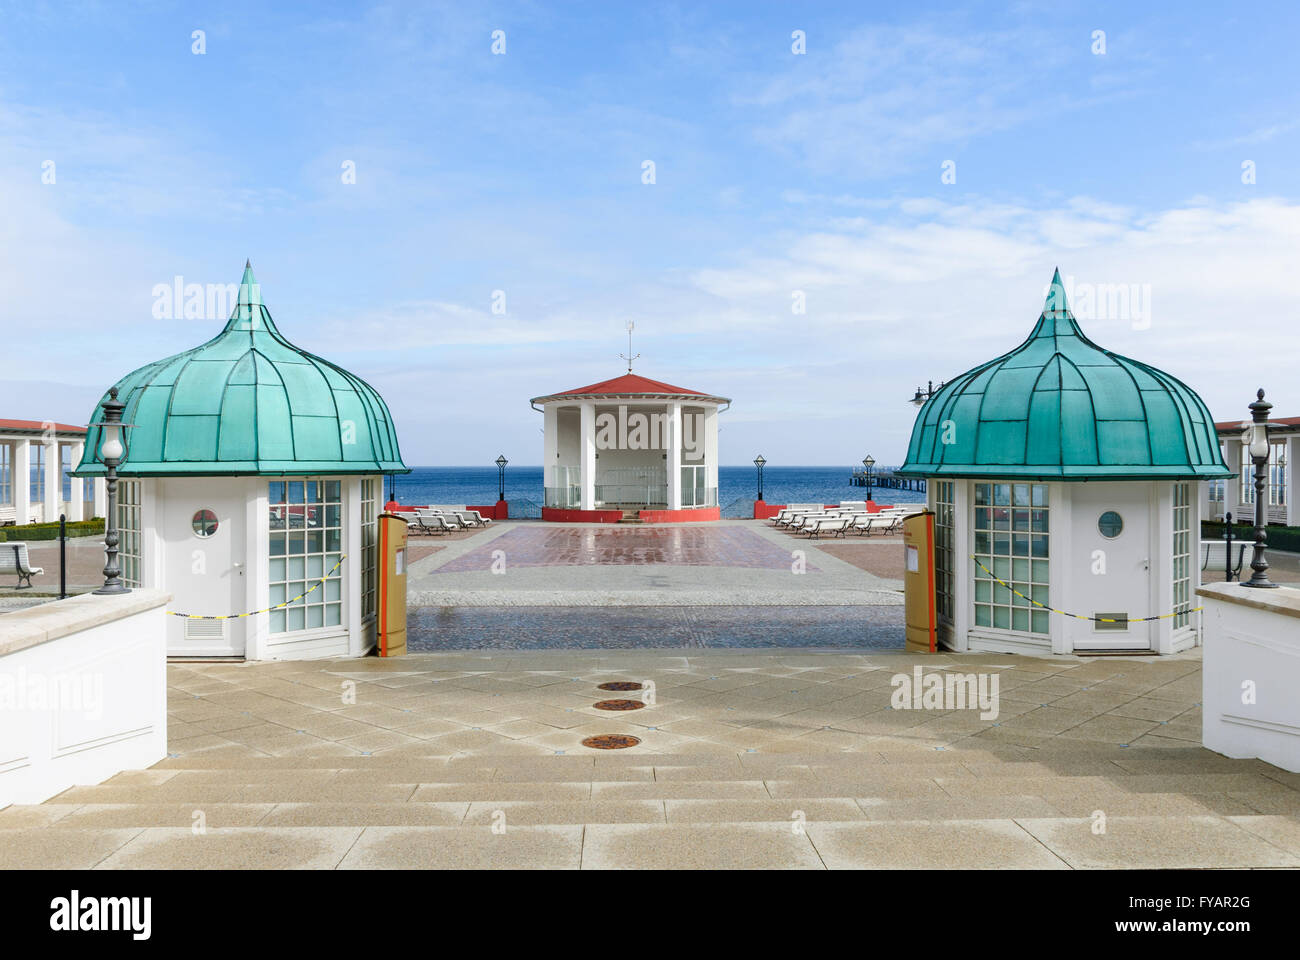 Square of the spa resort in Binz with pavilion and benches Stock Photo